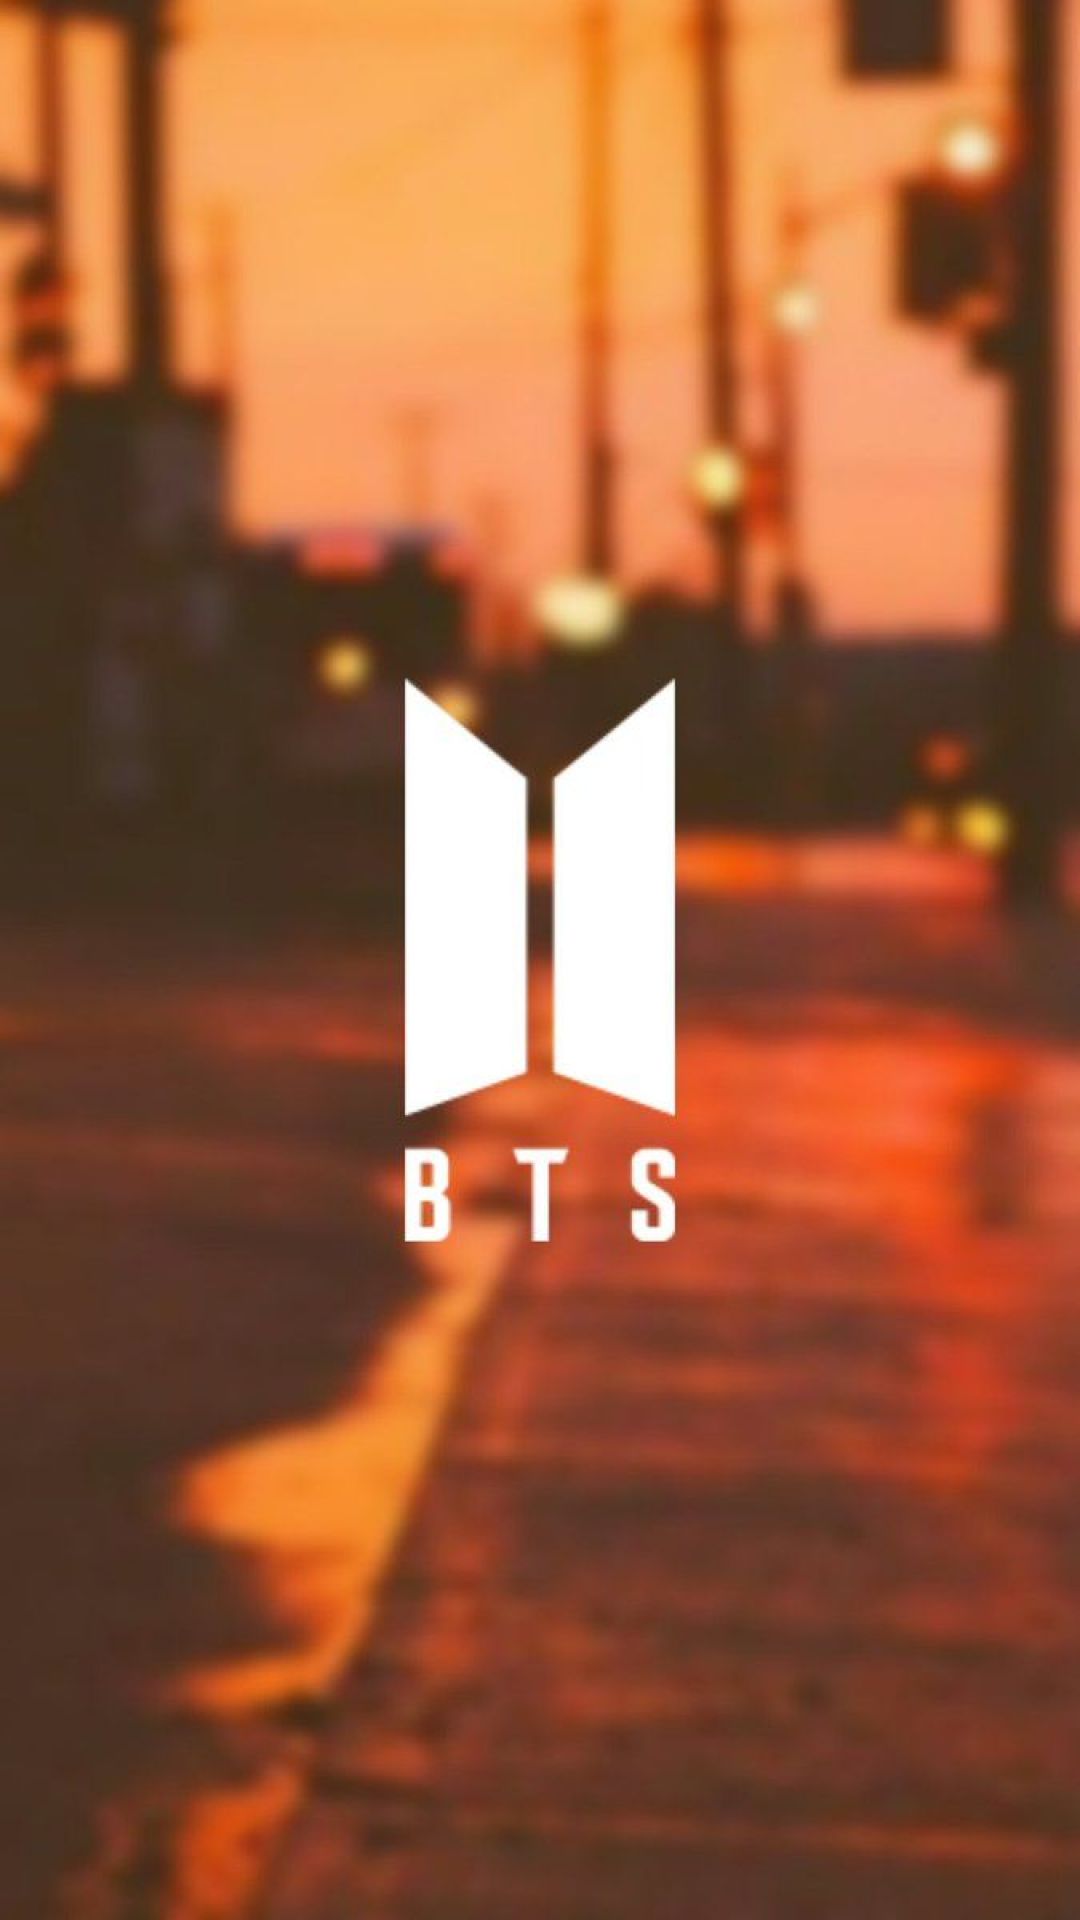 ✓[70+] BTS_twt wallpaper - [WALLPAPER] BTS NEW LOGO: Red - Android / iPhone HD  Wallpaper Background Download (png / jpg) (2023)